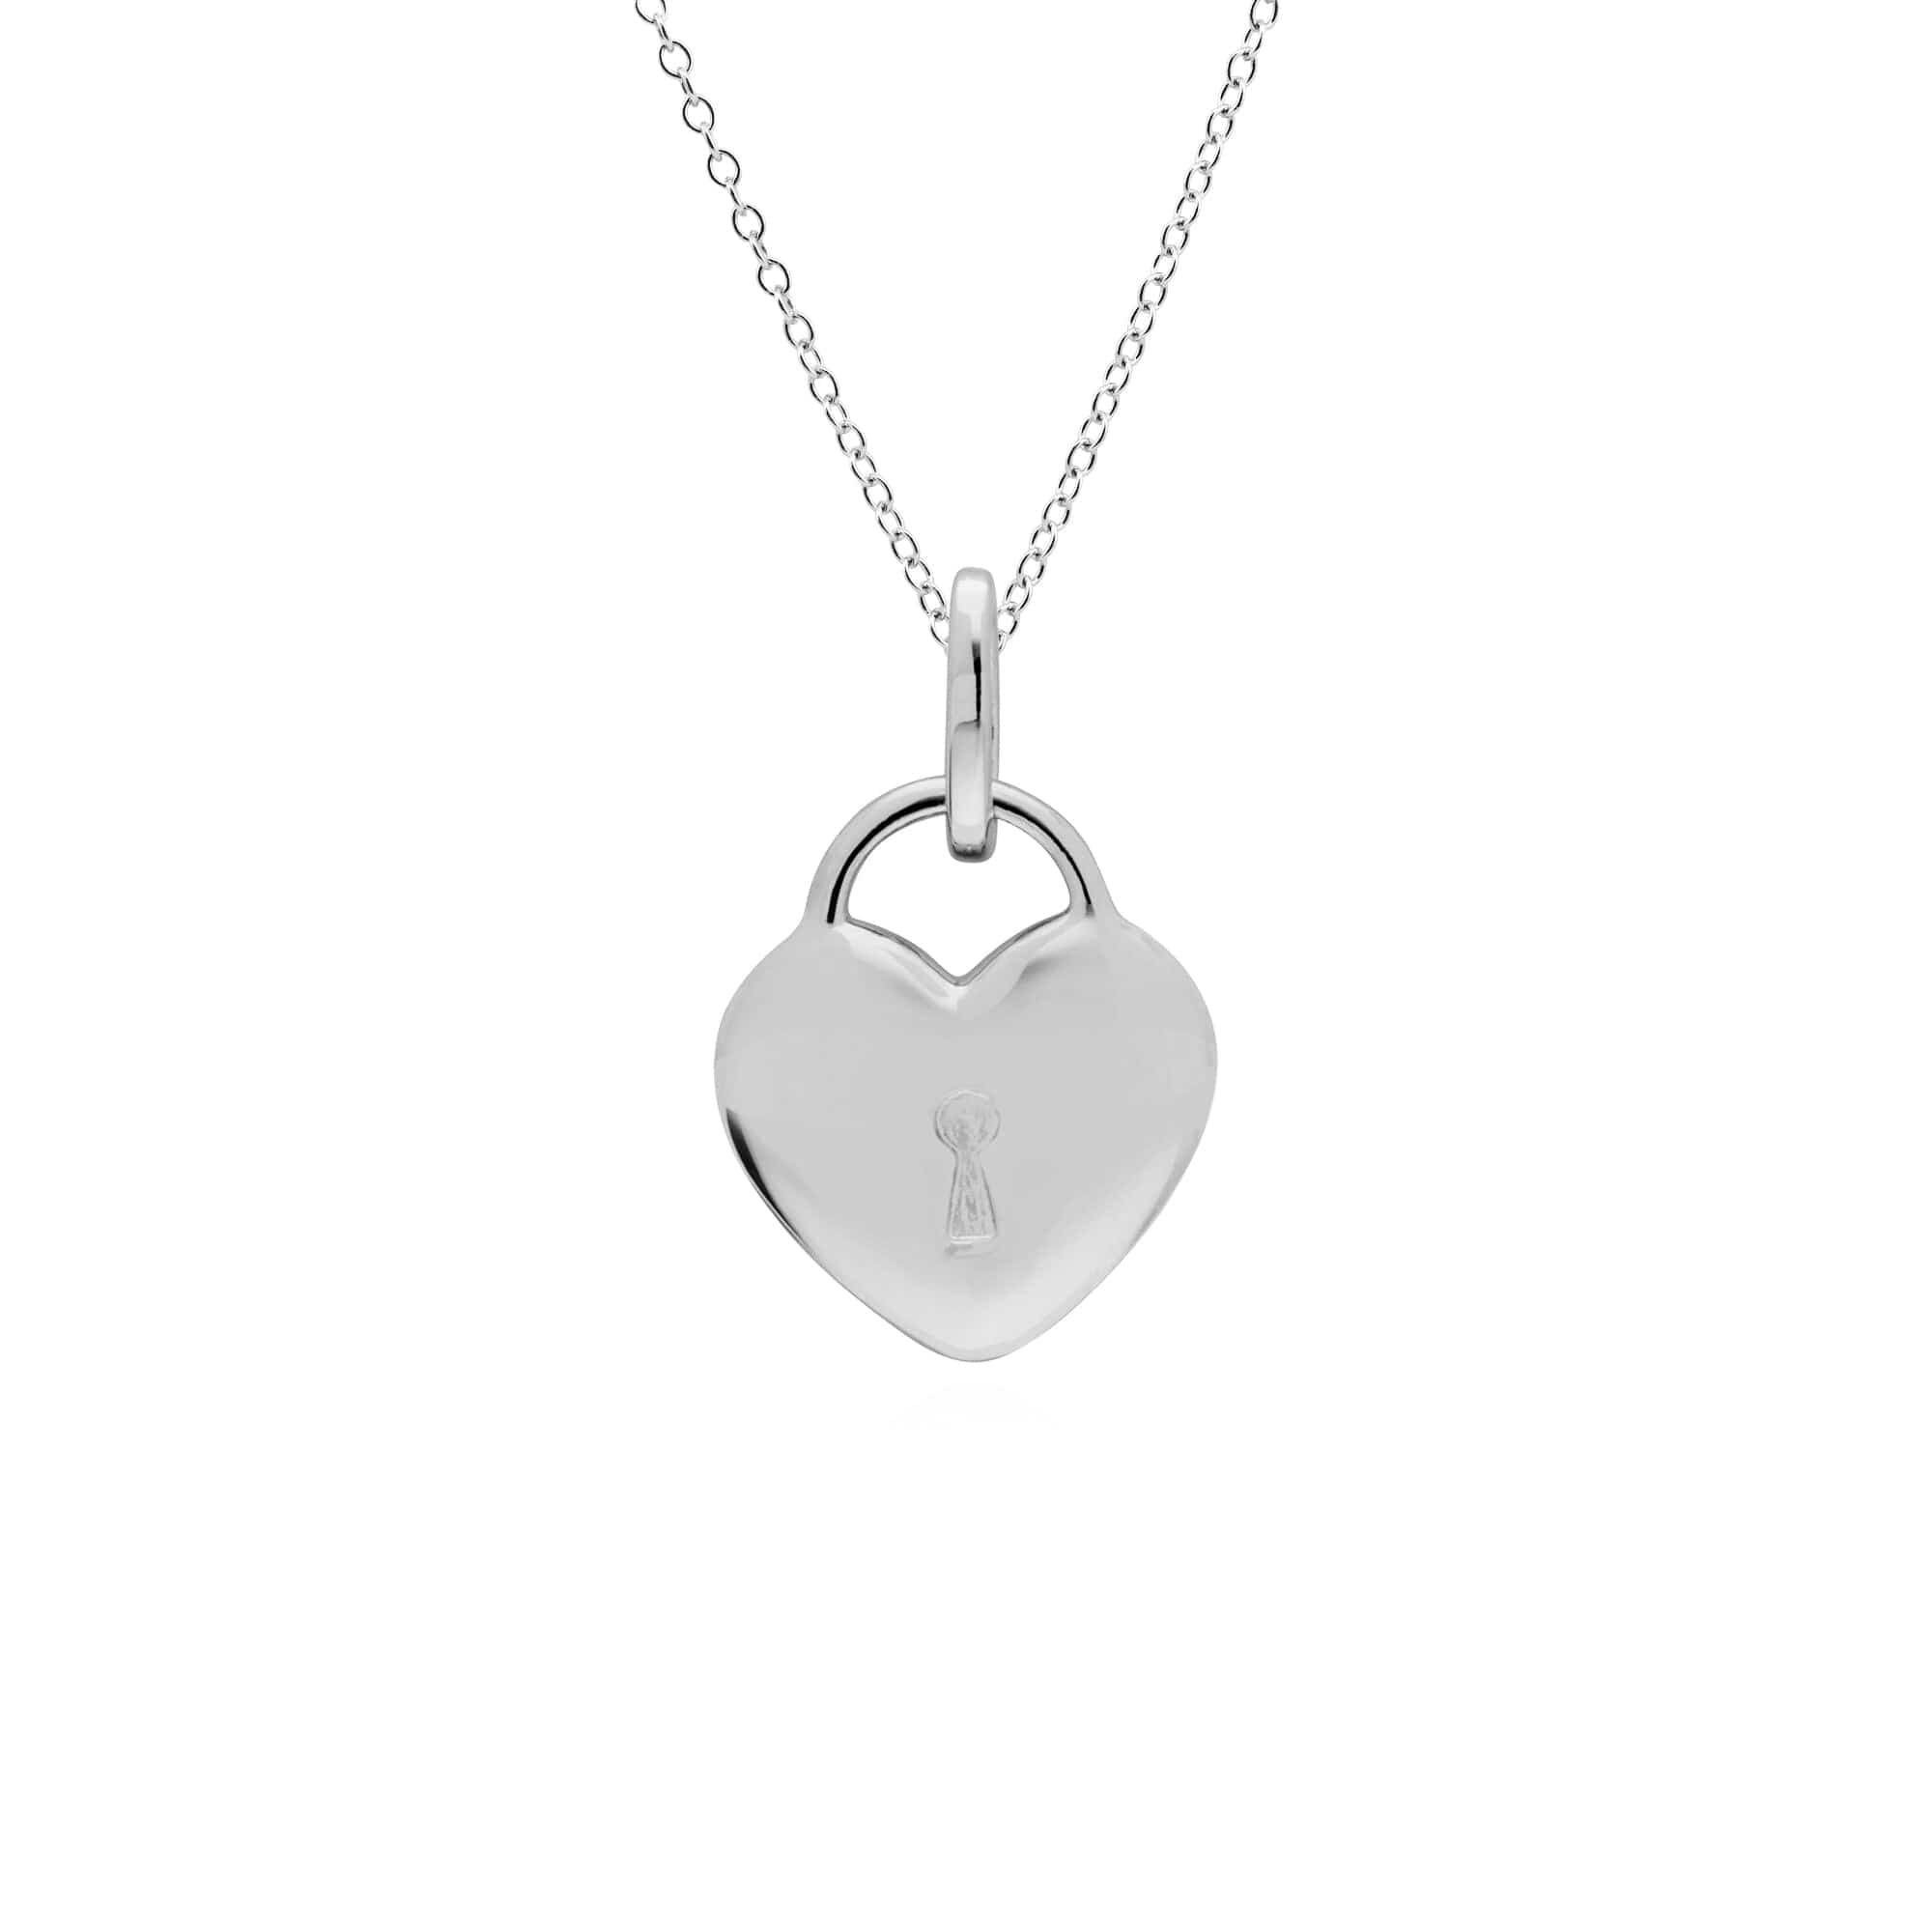 270P026001925-270P027001925 Classic Heart Lock Pendant & Turquoise Charm in 925 Sterling Silver 3